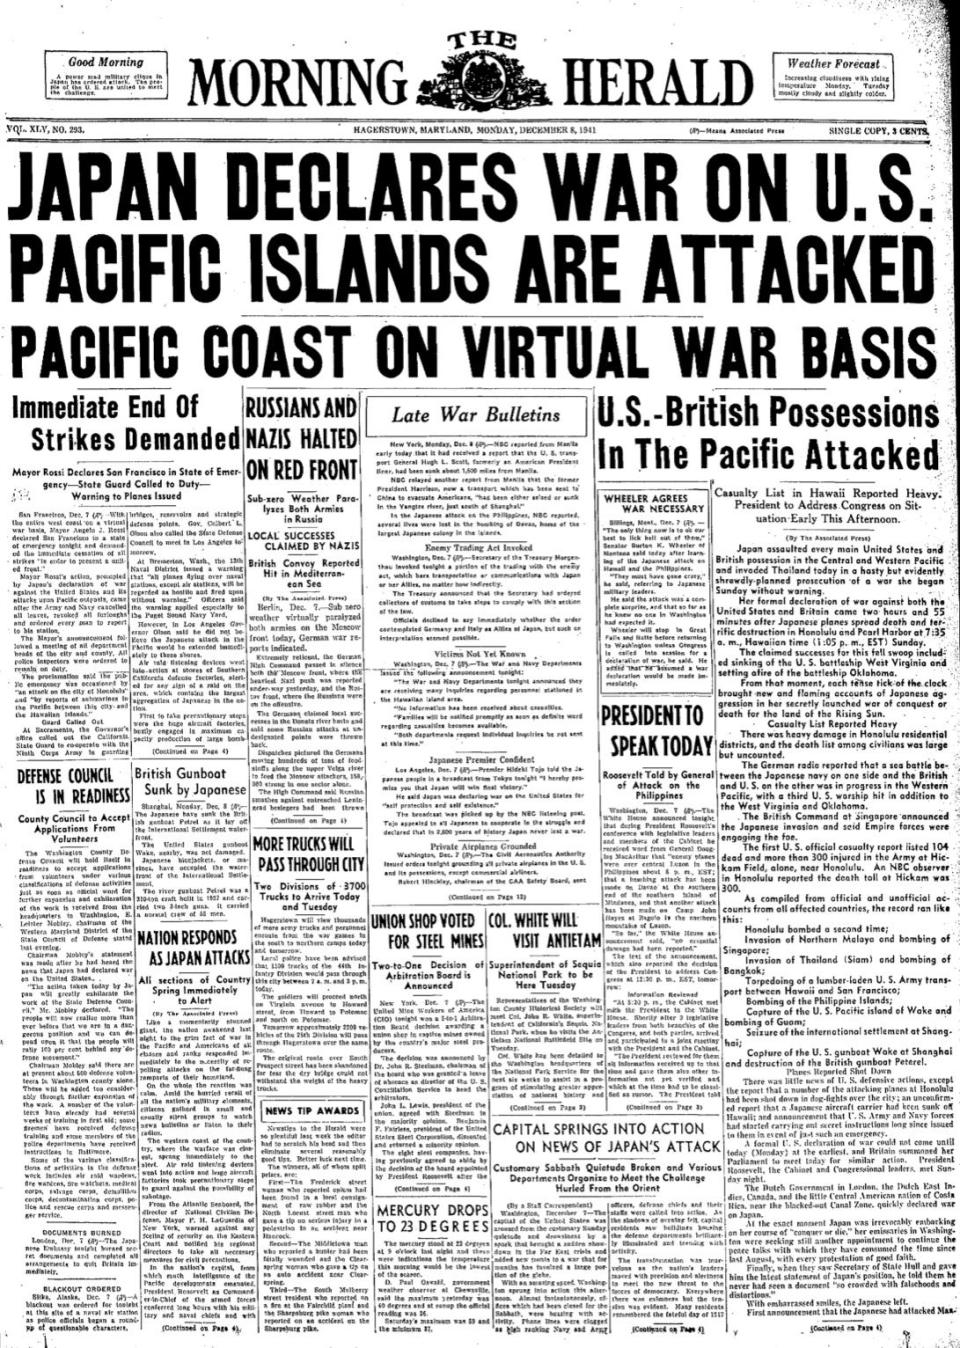 The Morning Herald kept stunned readers apprised of developments in the wake of the Japanese attack on Pearl Harbor.